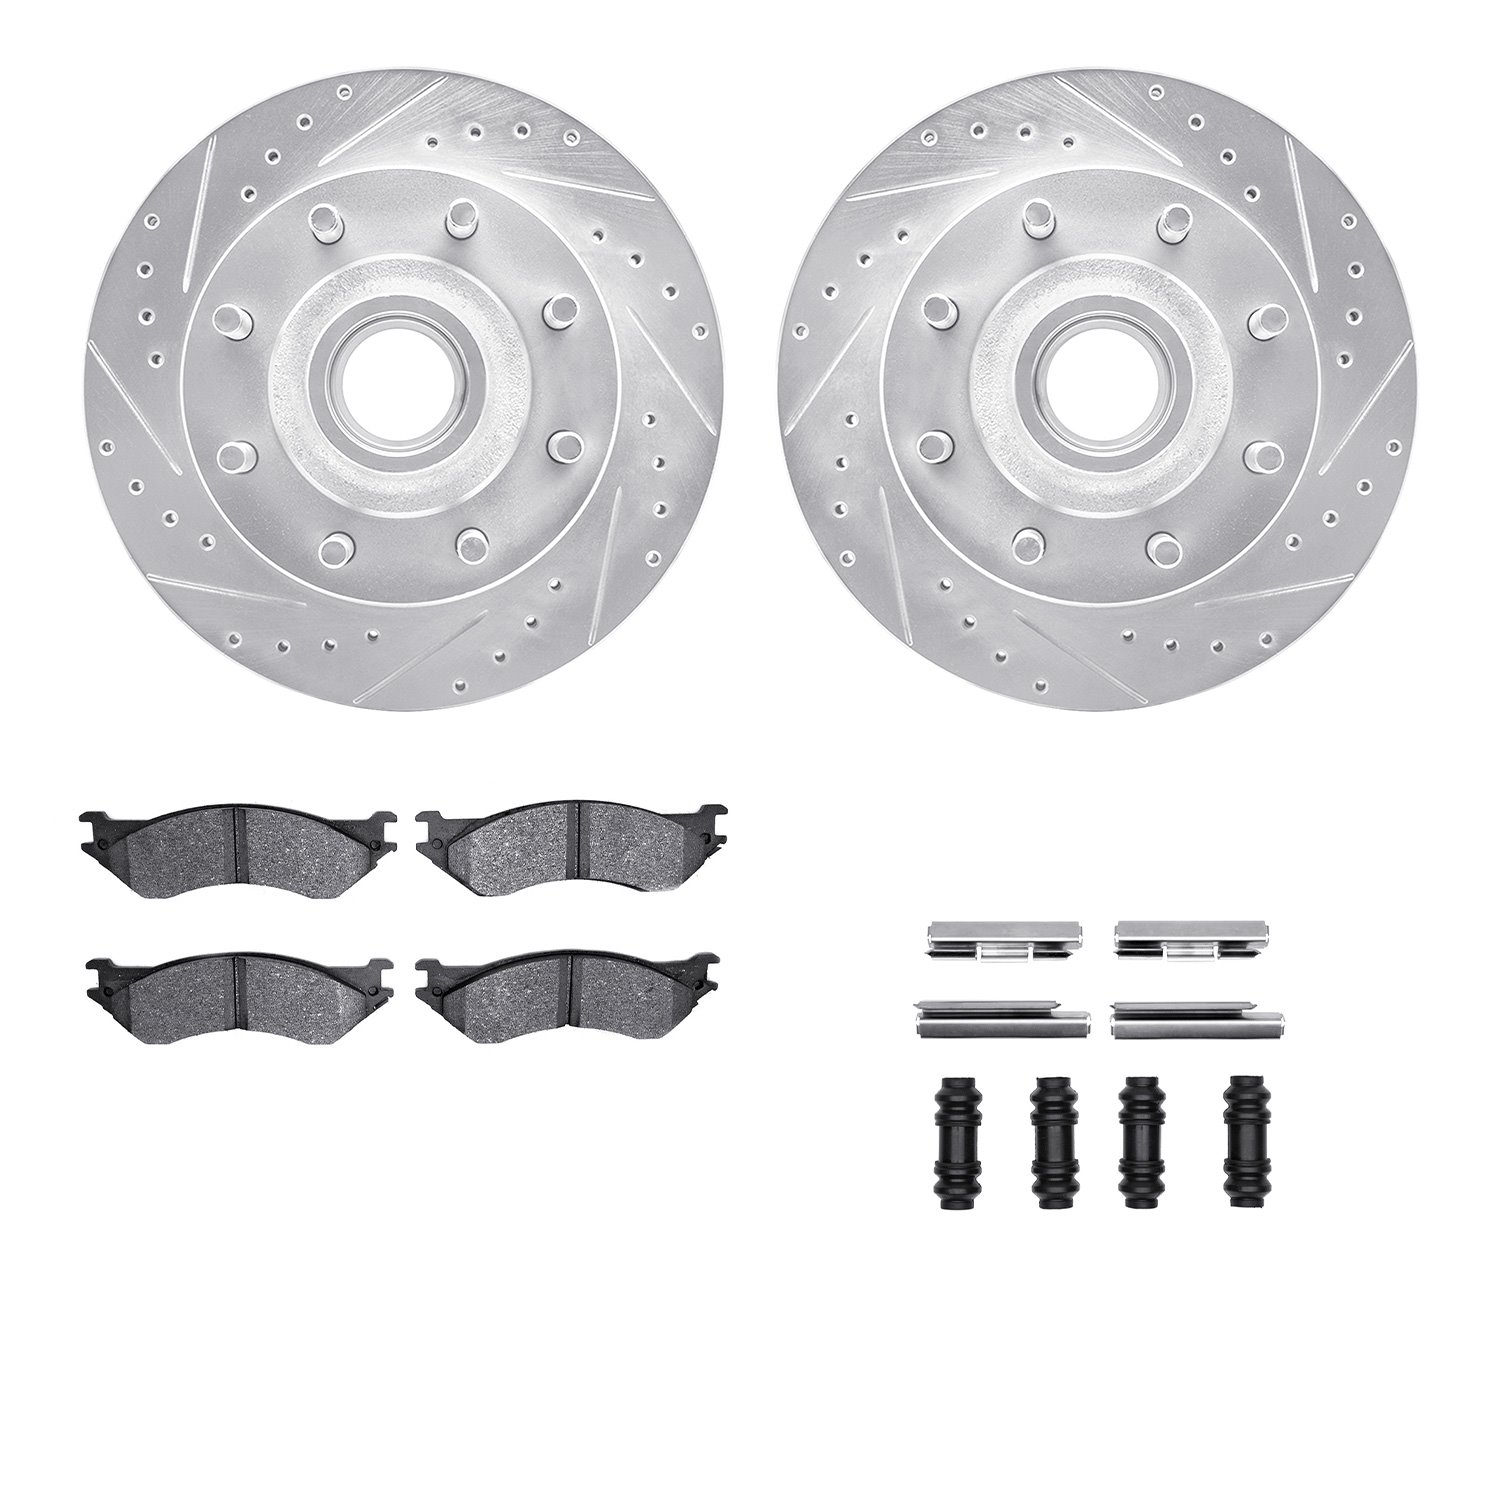 7412-54025 Drilled/Slotted Brake Rotors with Ultimate-Duty Brake Pads Kit & Hardware [Silver], 2000-2004 Ford/Lincoln/Mercury/Ma